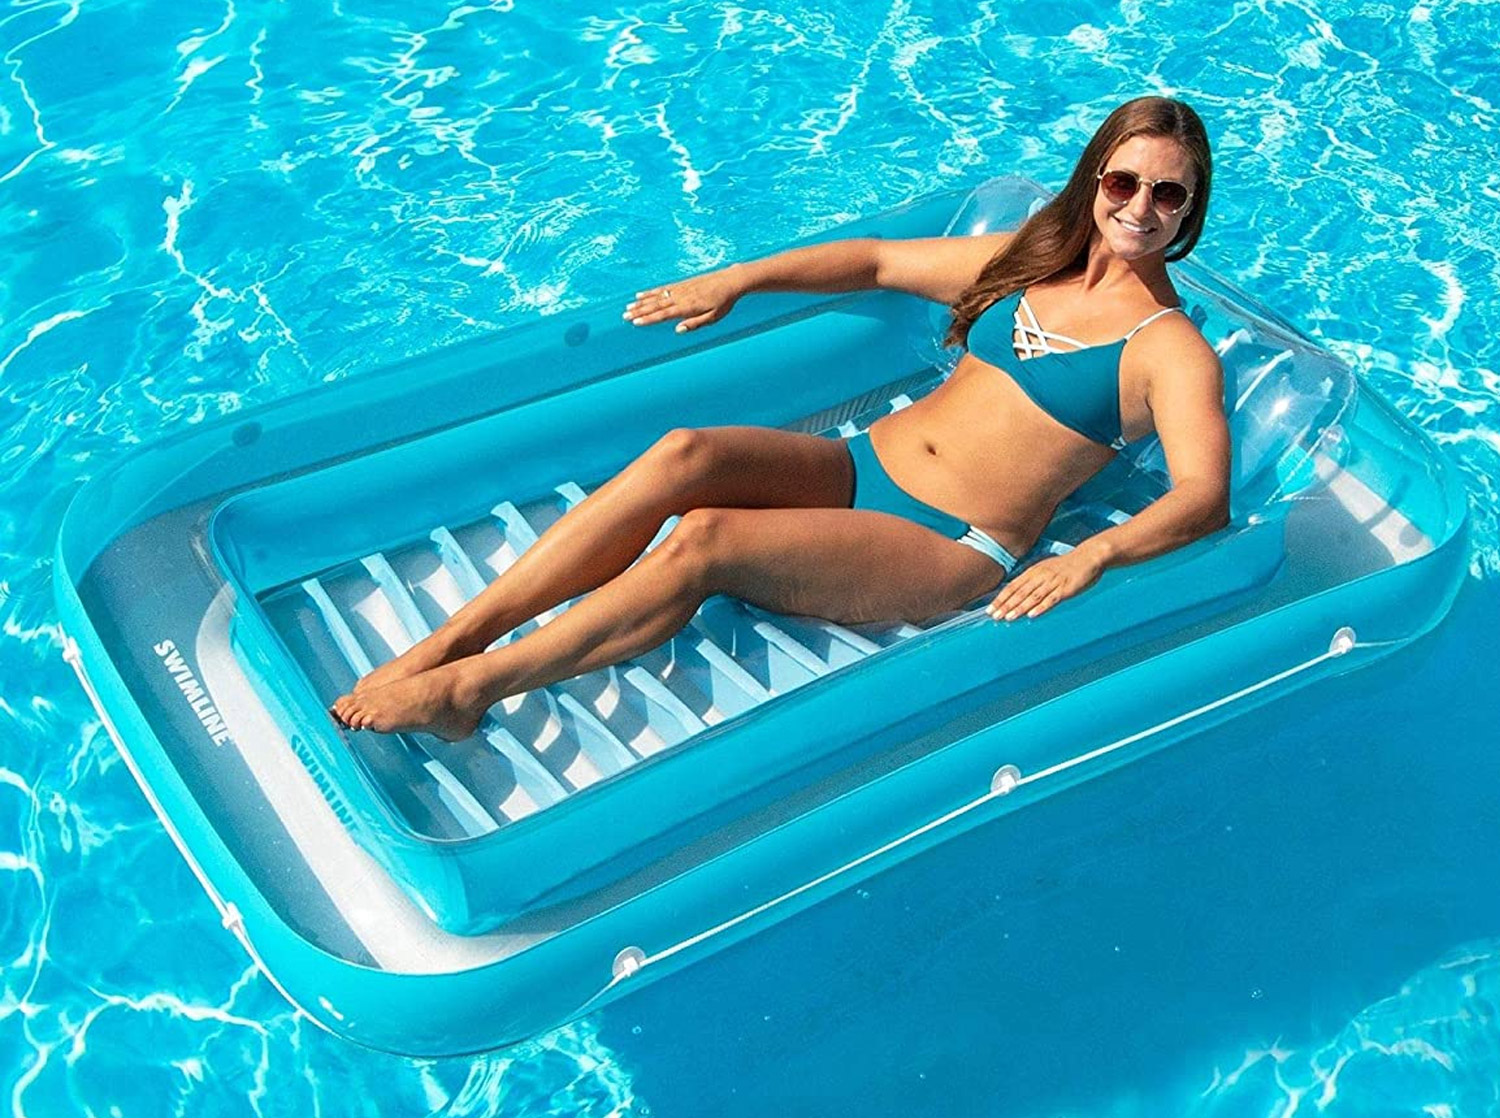 Inflatable Sunbathing Pool Lounger That Doubles as Mini Pool